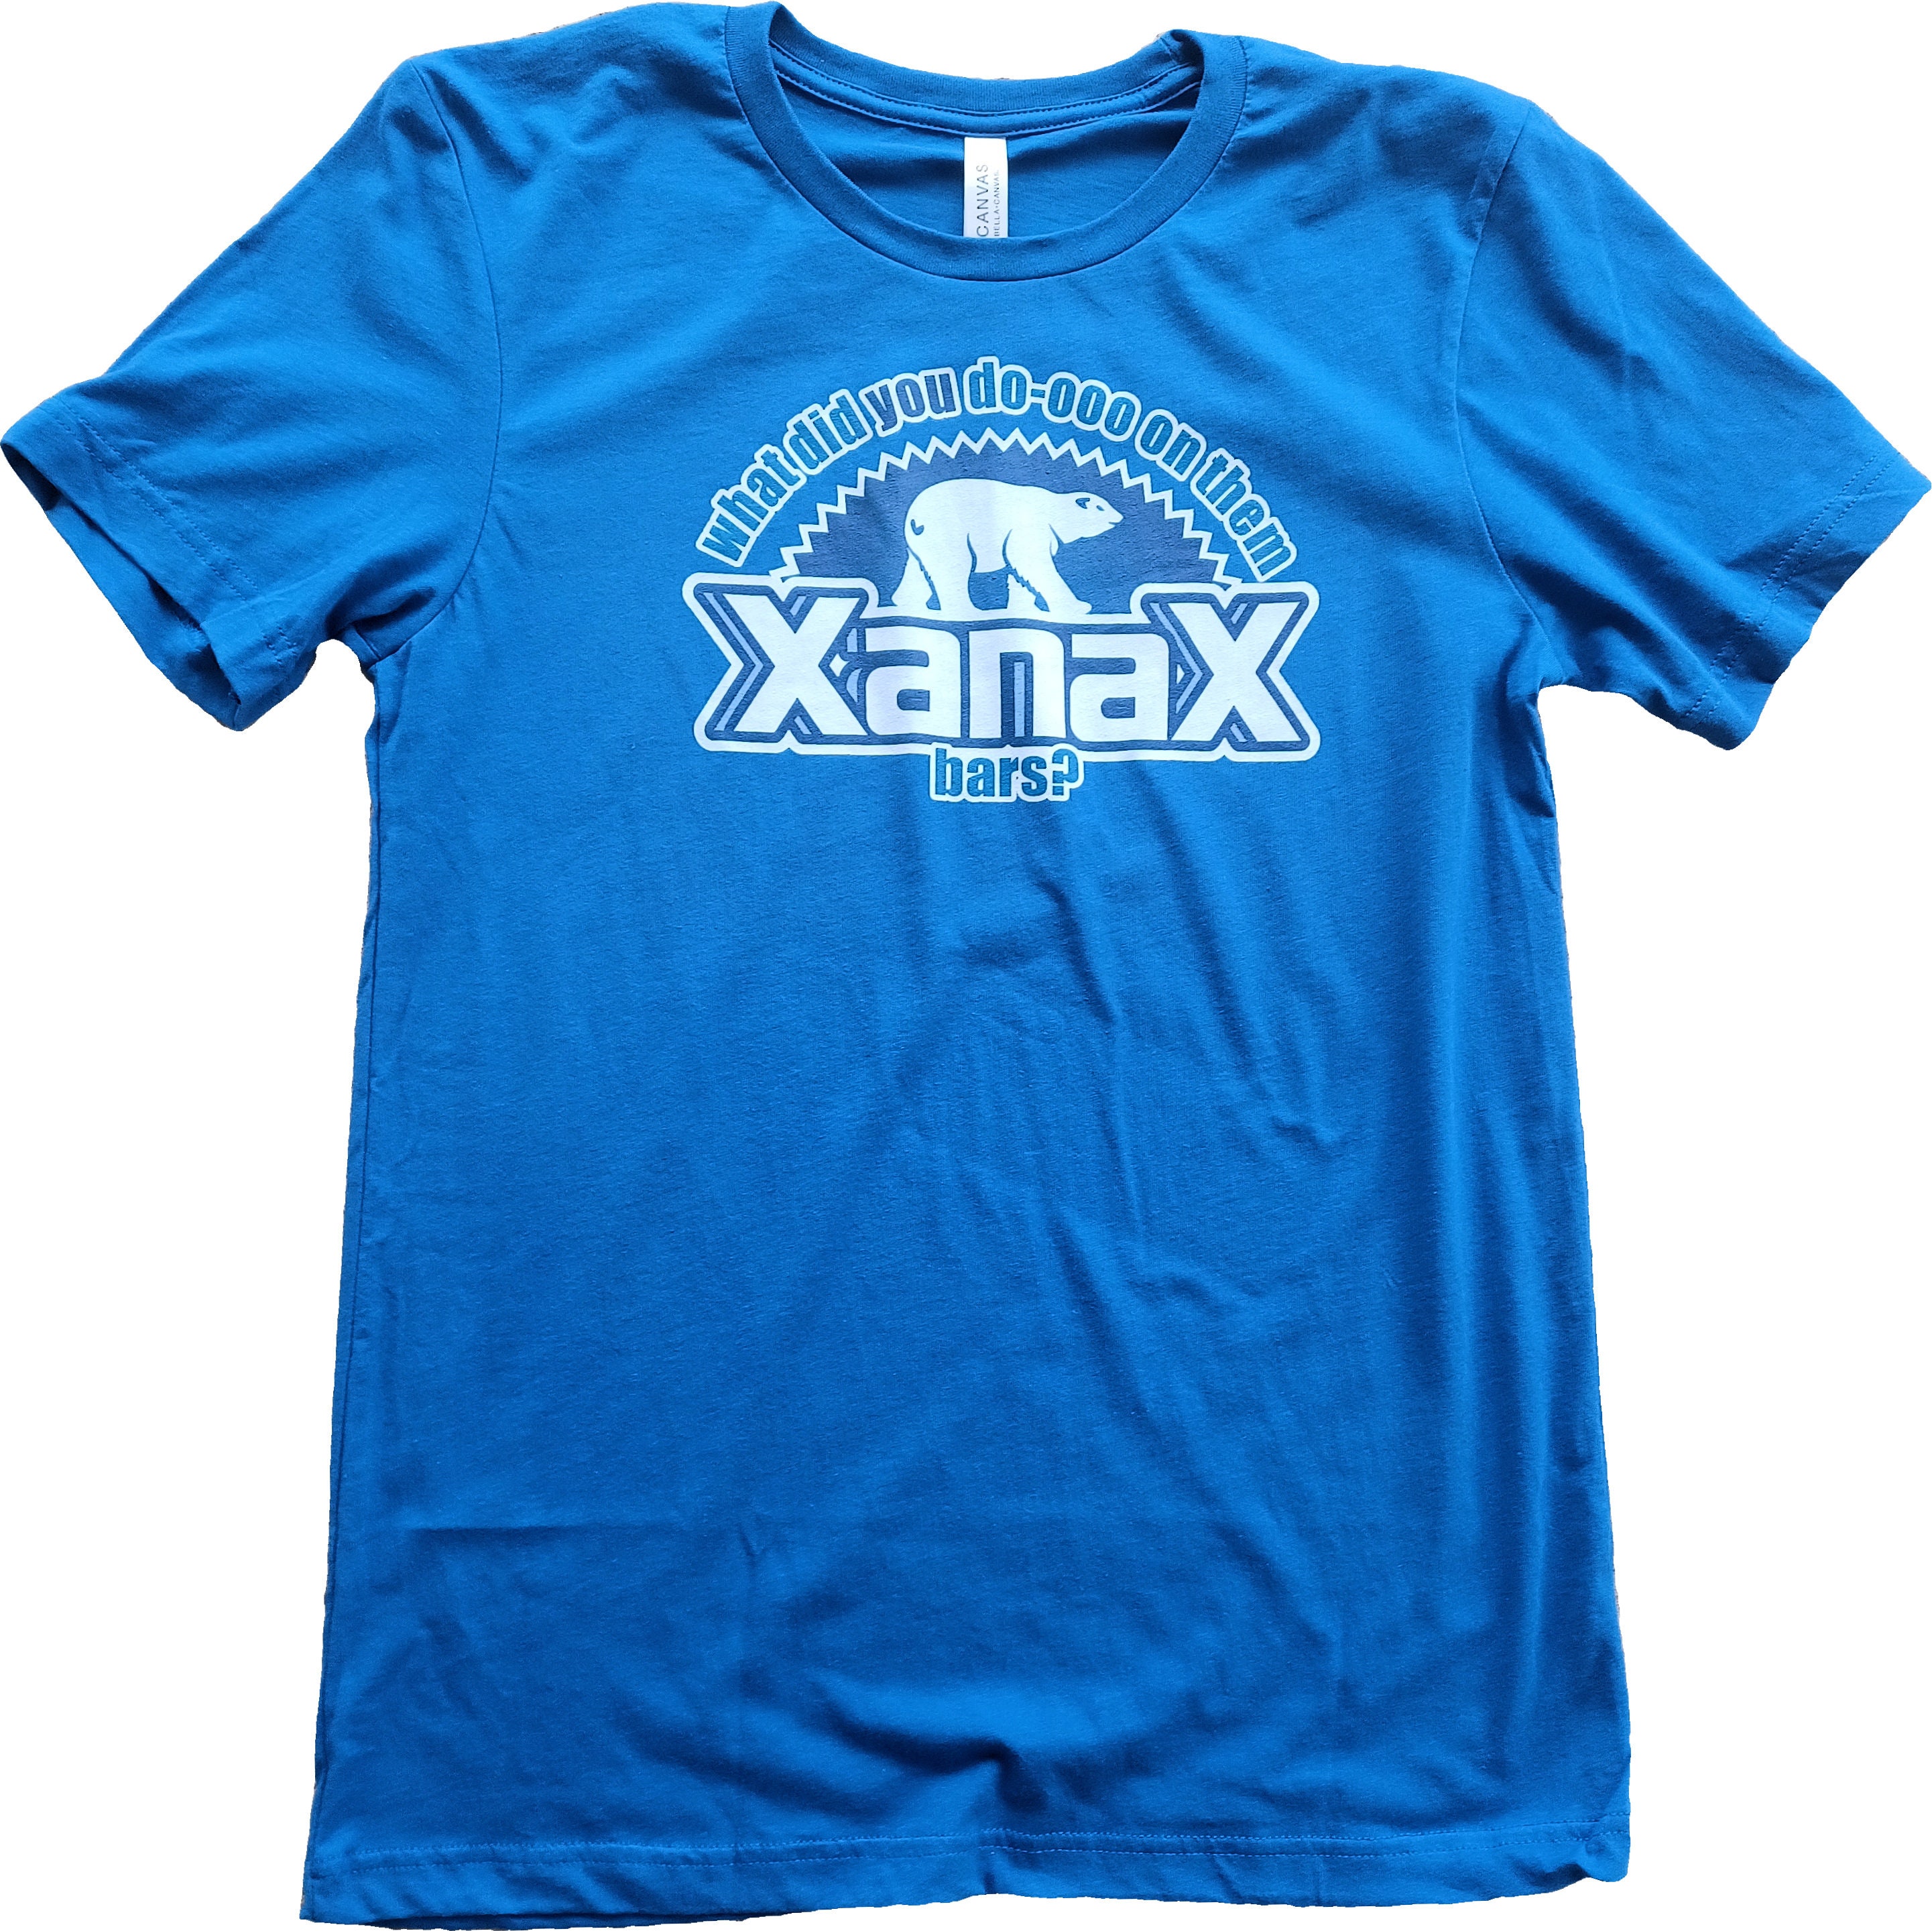 What Did You Do on Them Xanax Bars Short-sleeve Unisex T-shirt -   Finland